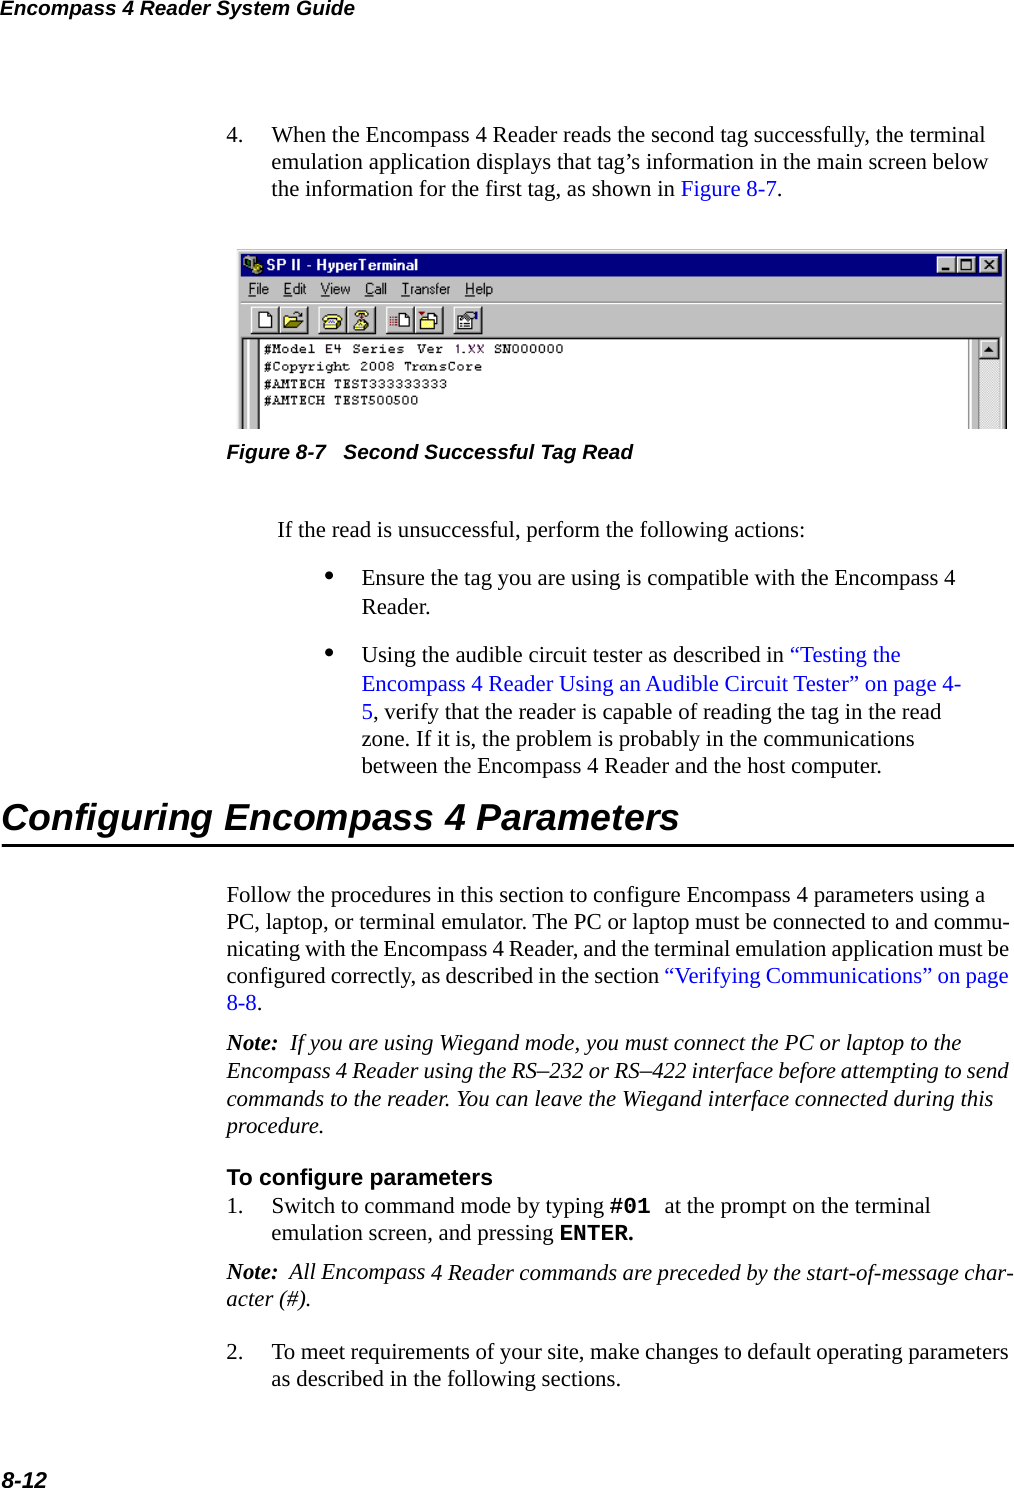 Encompass 4 Reader System Guide8-124. When the Encompass 4 Reader reads the second tag successfully, the terminal emulation application displays that tag’s information in the main screen below the information for the first tag, as shown in Figure 8-7. Figure 8-7   Second Successful Tag Read If the read is unsuccessful, perform the following actions:•Ensure the tag you are using is compatible with the Encompass 4 Reader.•Using the audible circuit tester as described in “Testing the Encompass 4 Reader Using an Audible Circuit Tester” on page 4-5, verify that the reader is capable of reading the tag in the read zone. If it is, the problem is probably in the communications between the Encompass 4 Reader and the host computer. Configuring Encompass 4 ParametersFollow the procedures in this section to configure Encompass 4 parameters using a PC, laptop, or terminal emulator. The PC or laptop must be connected to and commu-nicating with the Encompass 4 Reader, and the terminal emulation application must be configured correctly, as described in the section “Verifying Communications” on page 8-8.Note:  If you are using Wiegand mode, you must connect the PC or laptop to the Encompass 4 Reader using the RS–232 or RS–422 interface before attempting to send commands to the reader. You can leave the Wiegand interface connected during this procedure. To configure parameters1. Switch to command mode by typing #01 at the prompt on the terminal emulation screen, and pressing ENTER. Note:  All Encompass 4 Reader commands are preceded by the start-of-message char-acter (#).2. To meet requirements of your site, make changes to default operating parameters as described in the following sections.